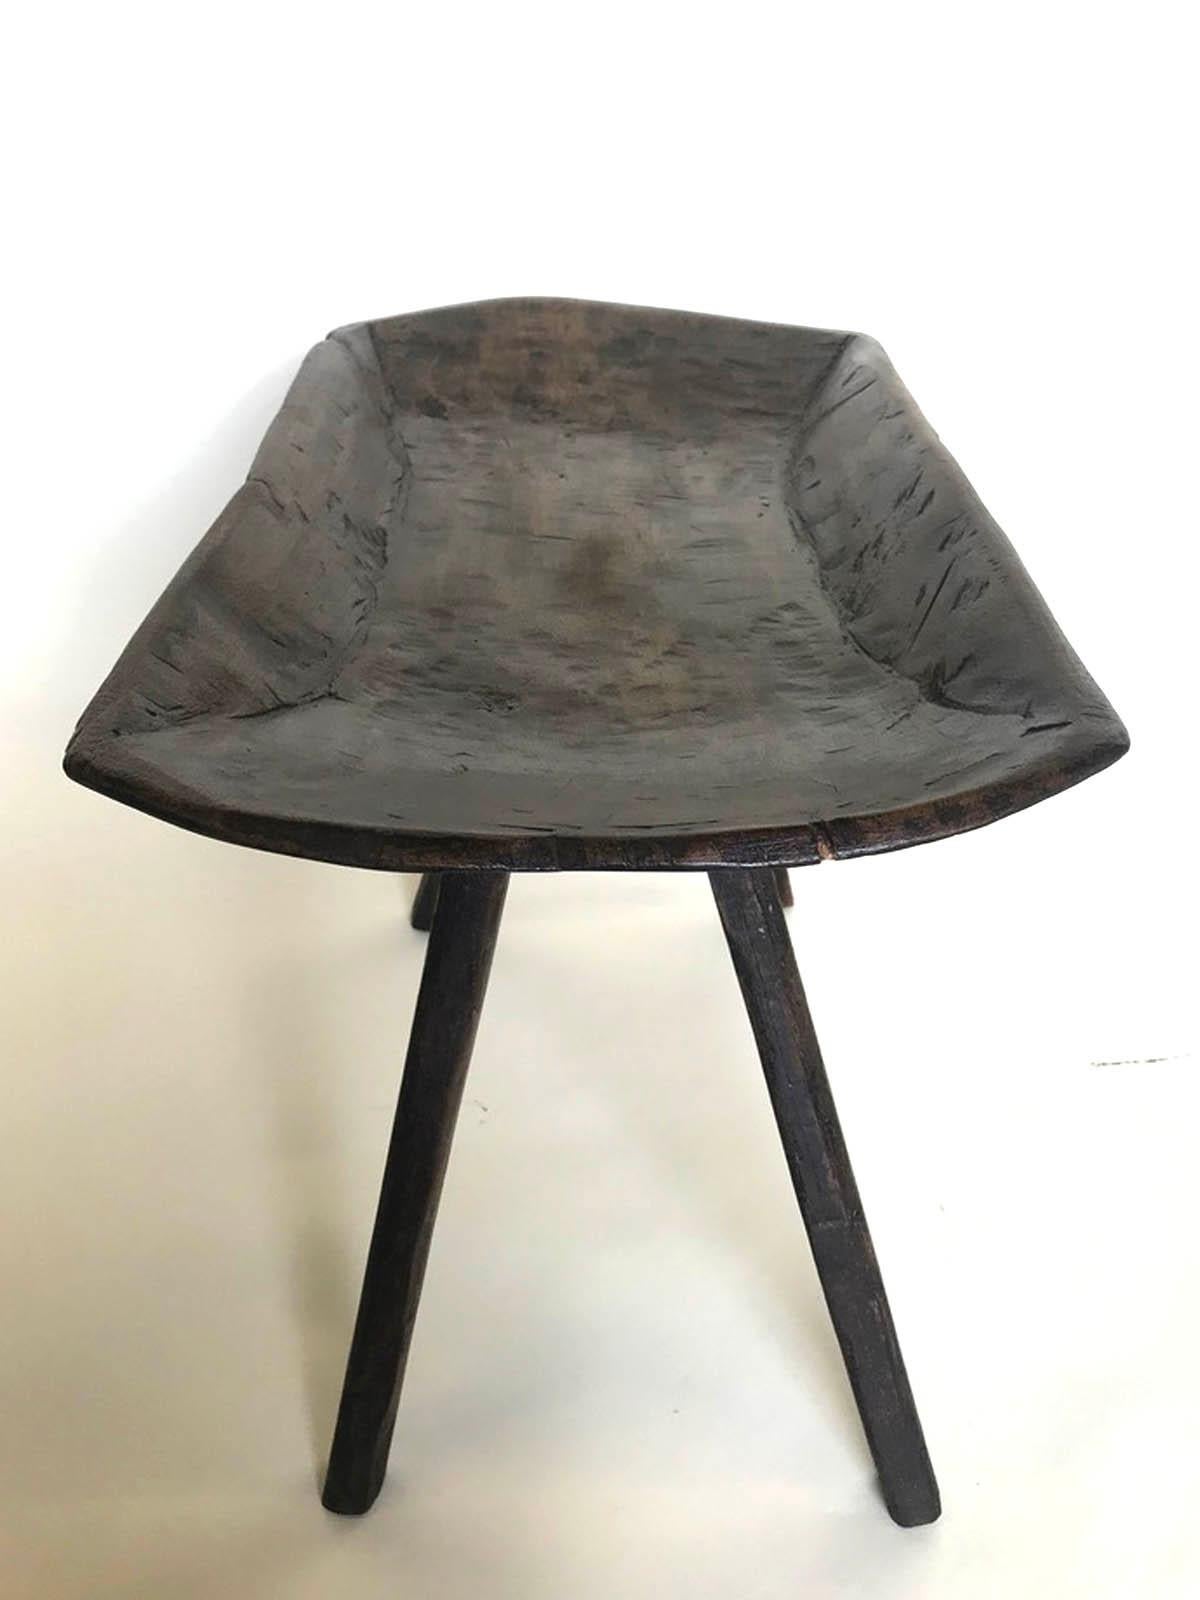 A side table made from an antique, 19th century wooden tray from Guatemala. Legs have been added and matched to top. Great little catch all side table. Beautiful dark patina.